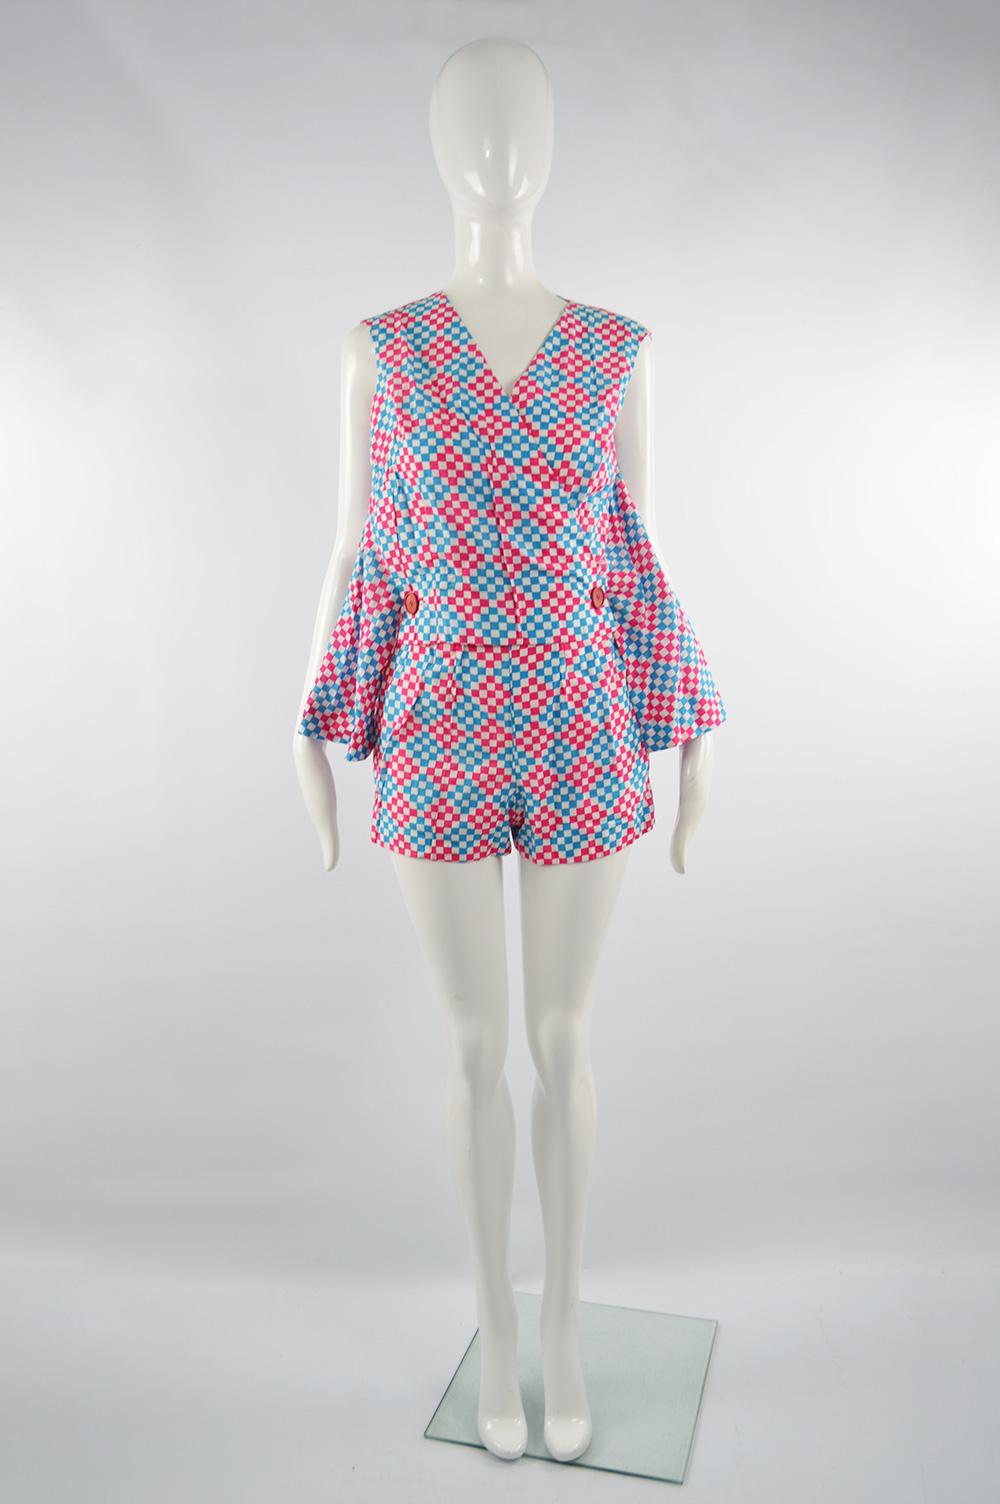 An incredible and fun sleeveless vintage women's playsuit / romper from the 60s by high end Italian label, Scarabocchio for luxury department store, Harvey Nichols. In a pink, white and blue lightweight cotton with a checkered pattern throughout,